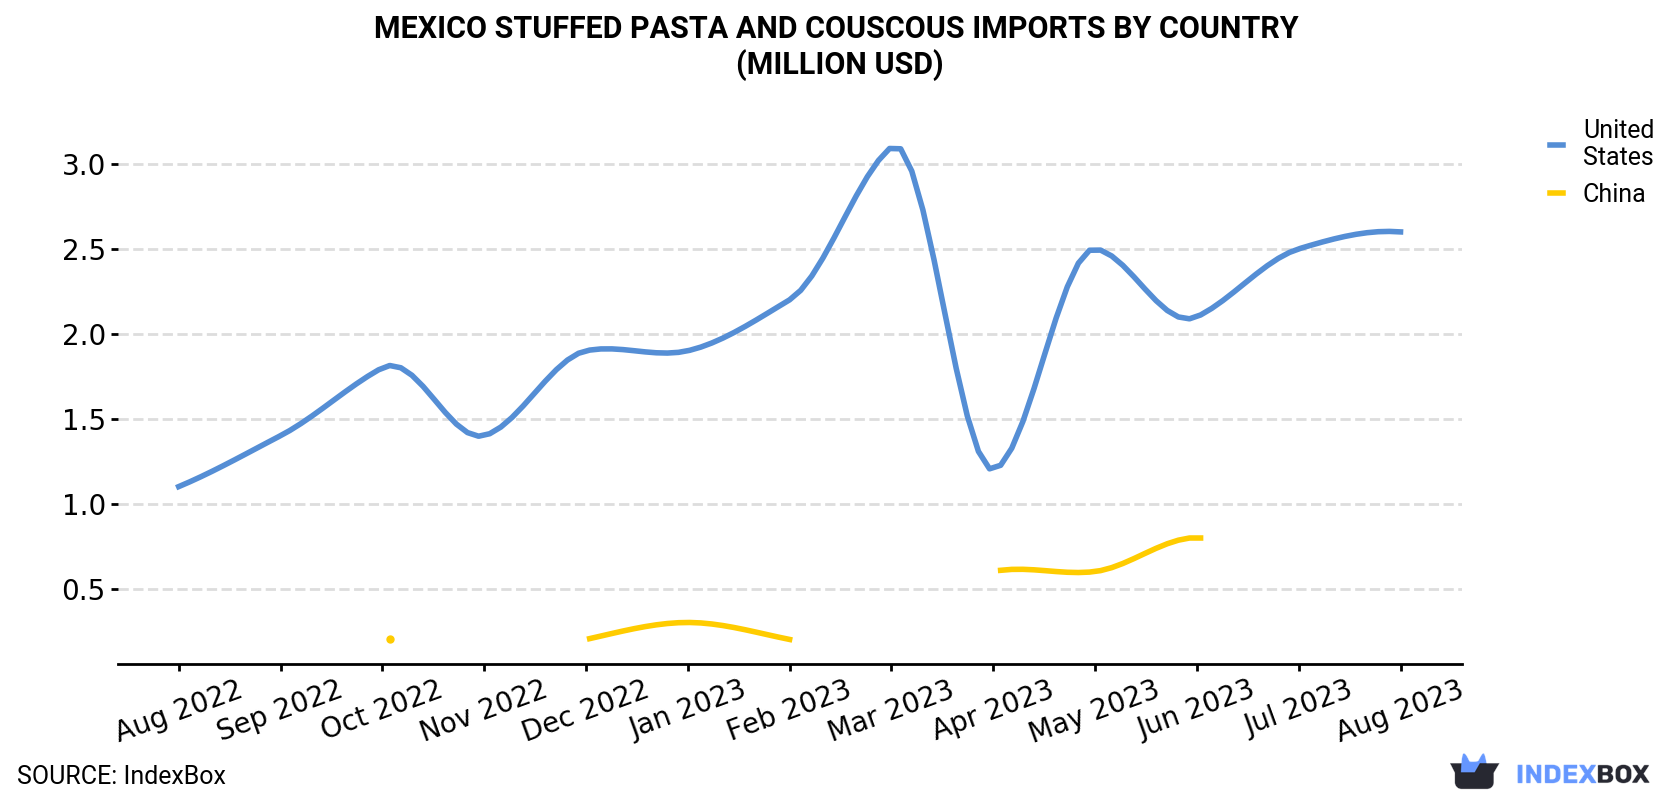 Mexico Stuffed Pasta and Couscous Imports By Country (Million USD)